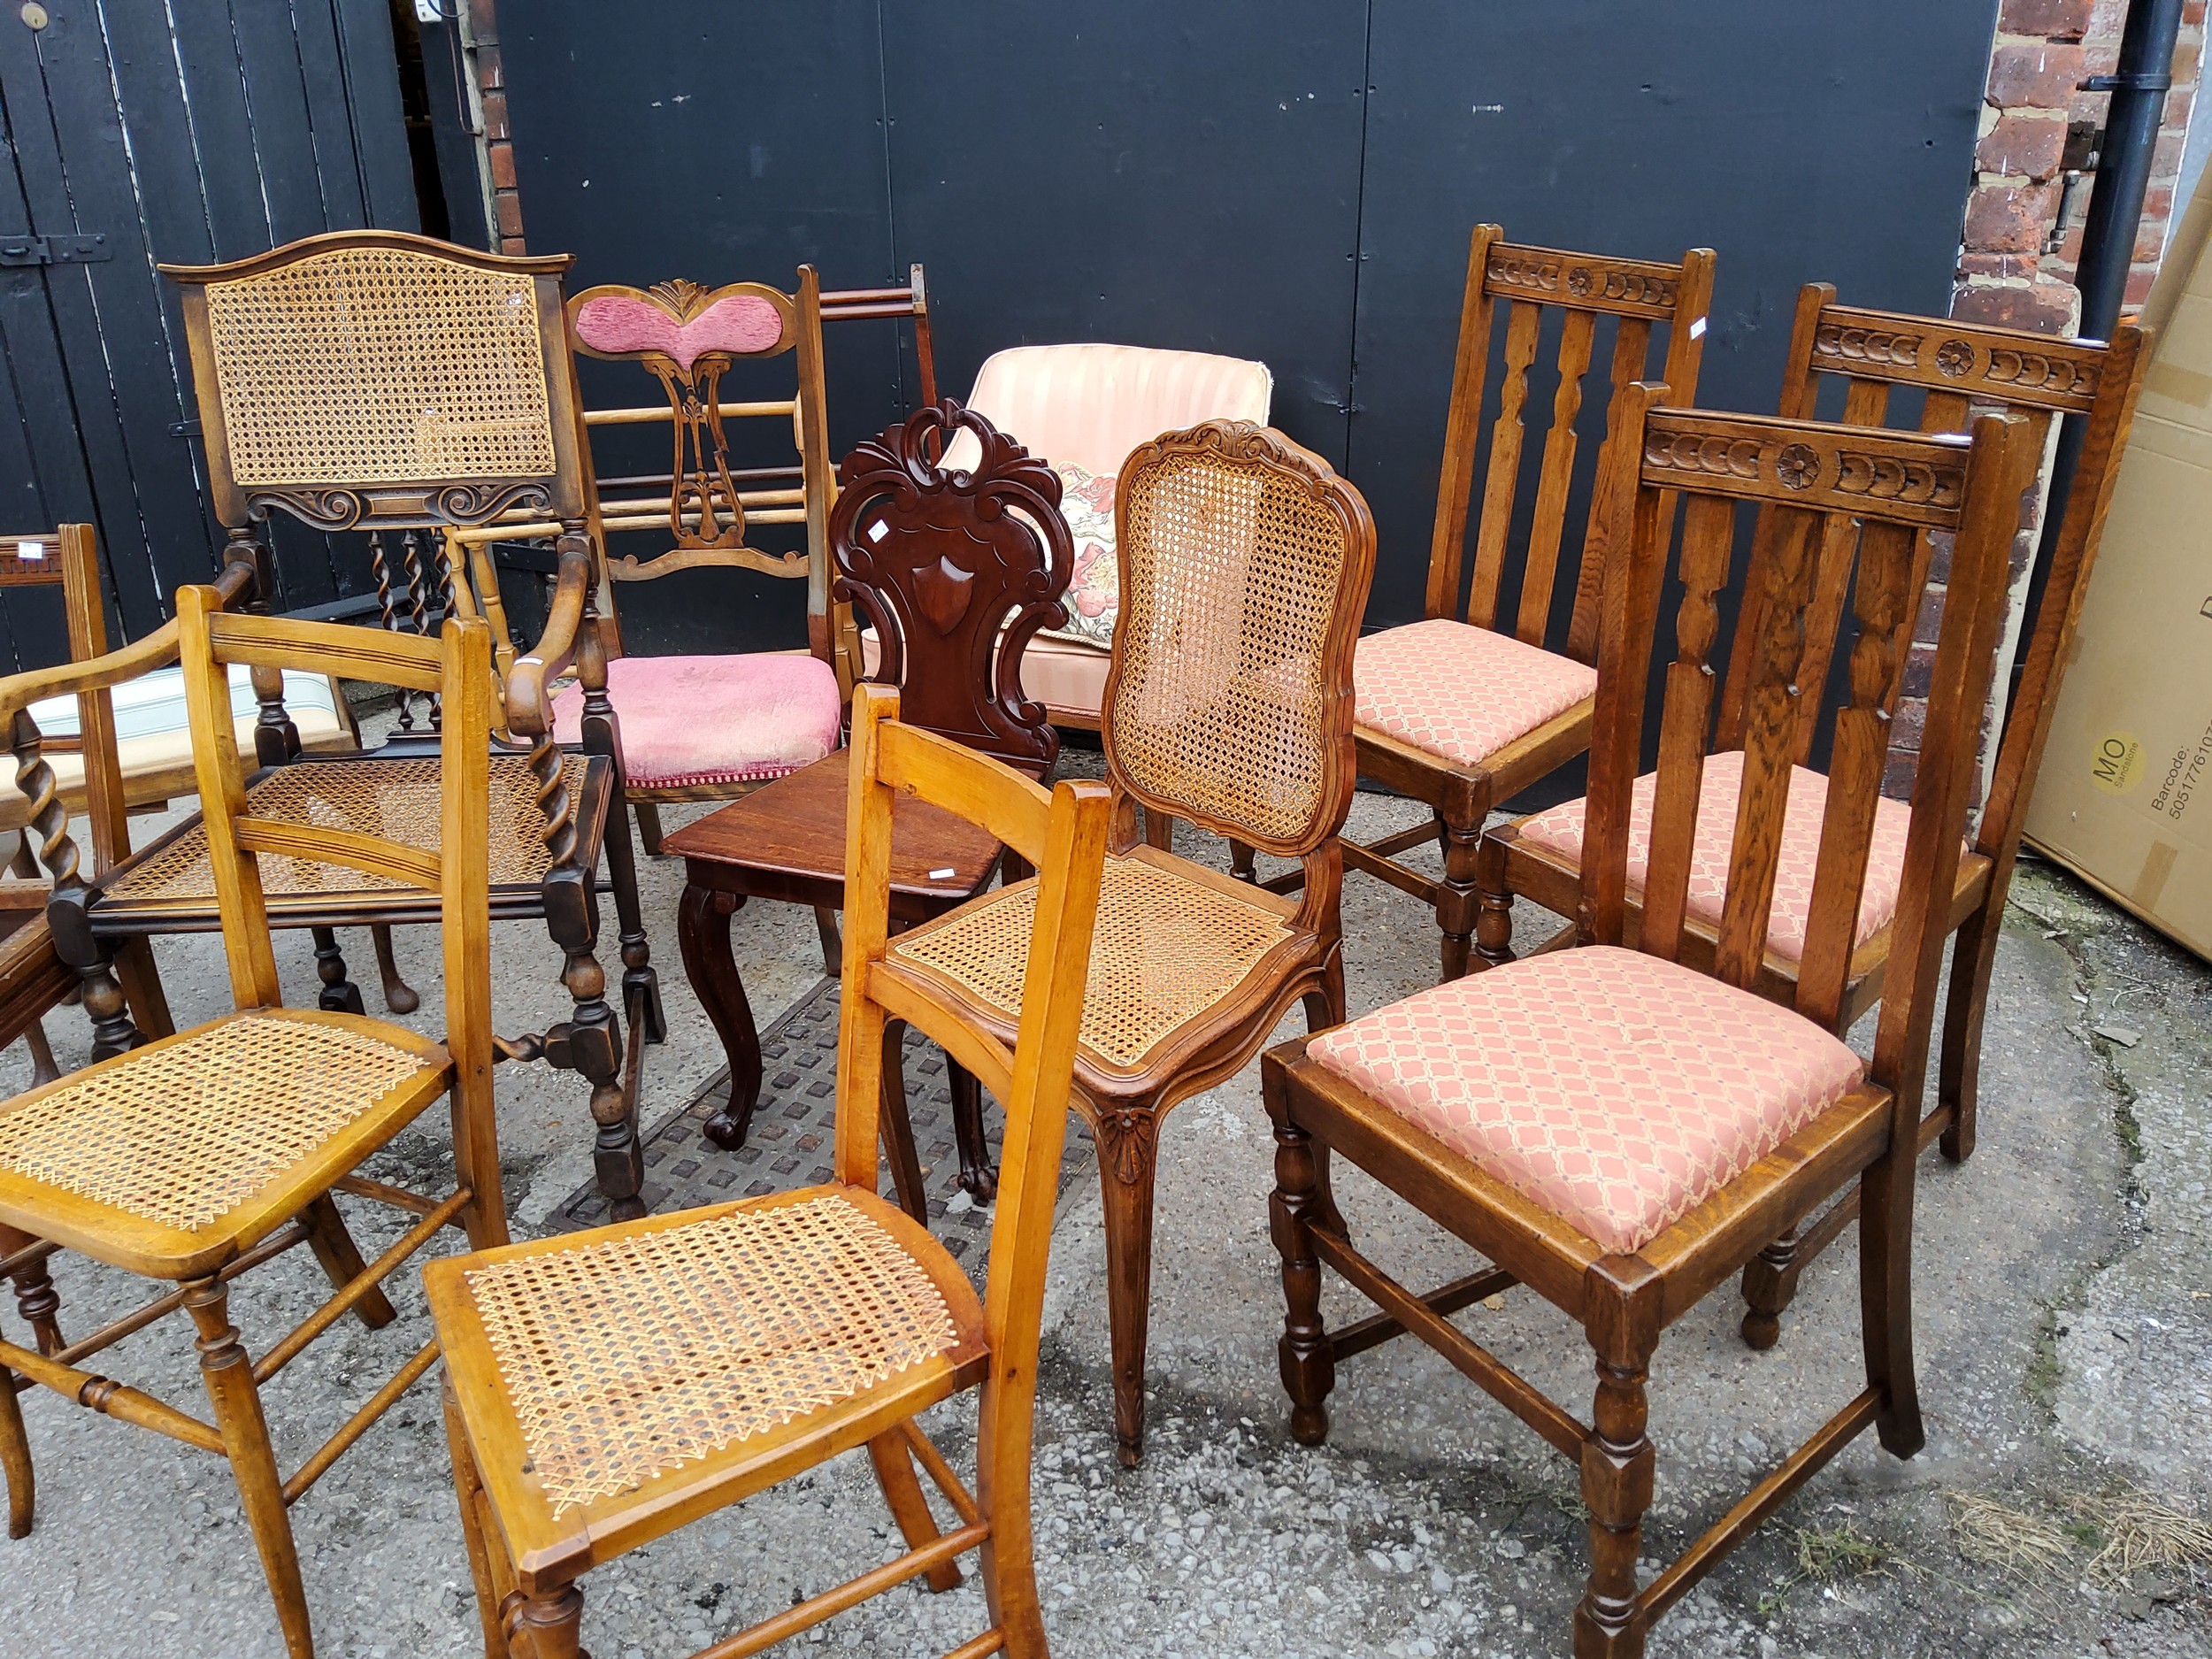 Harlequin set of chairs, footstool and towel racks, including a Victorian mahogany hall chair, - Image 2 of 4